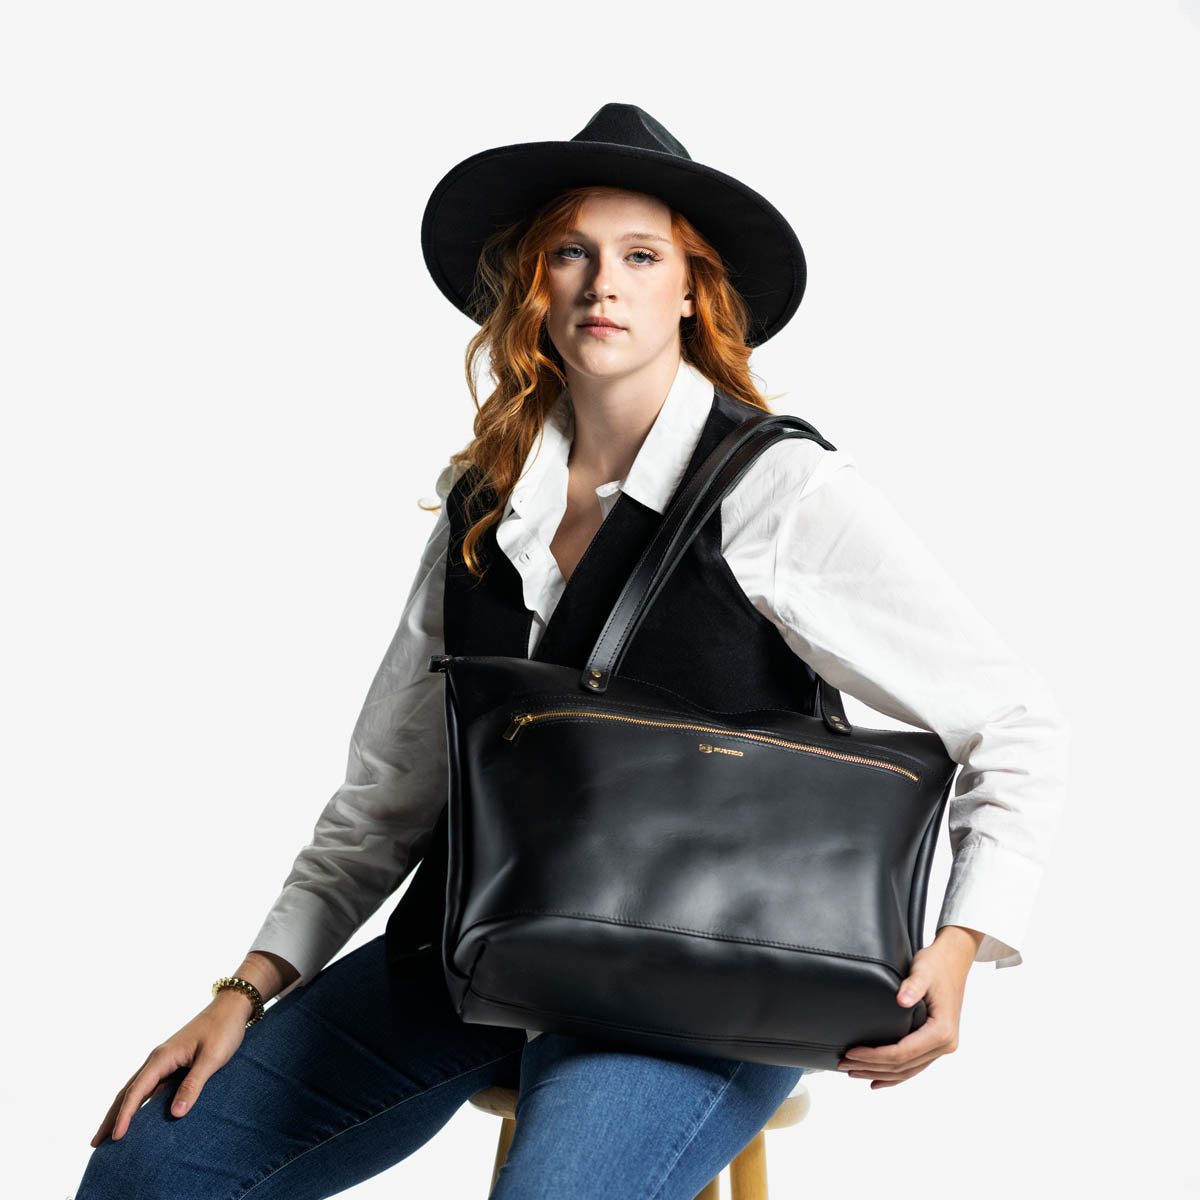 Rustico Large Leather Tote Bag